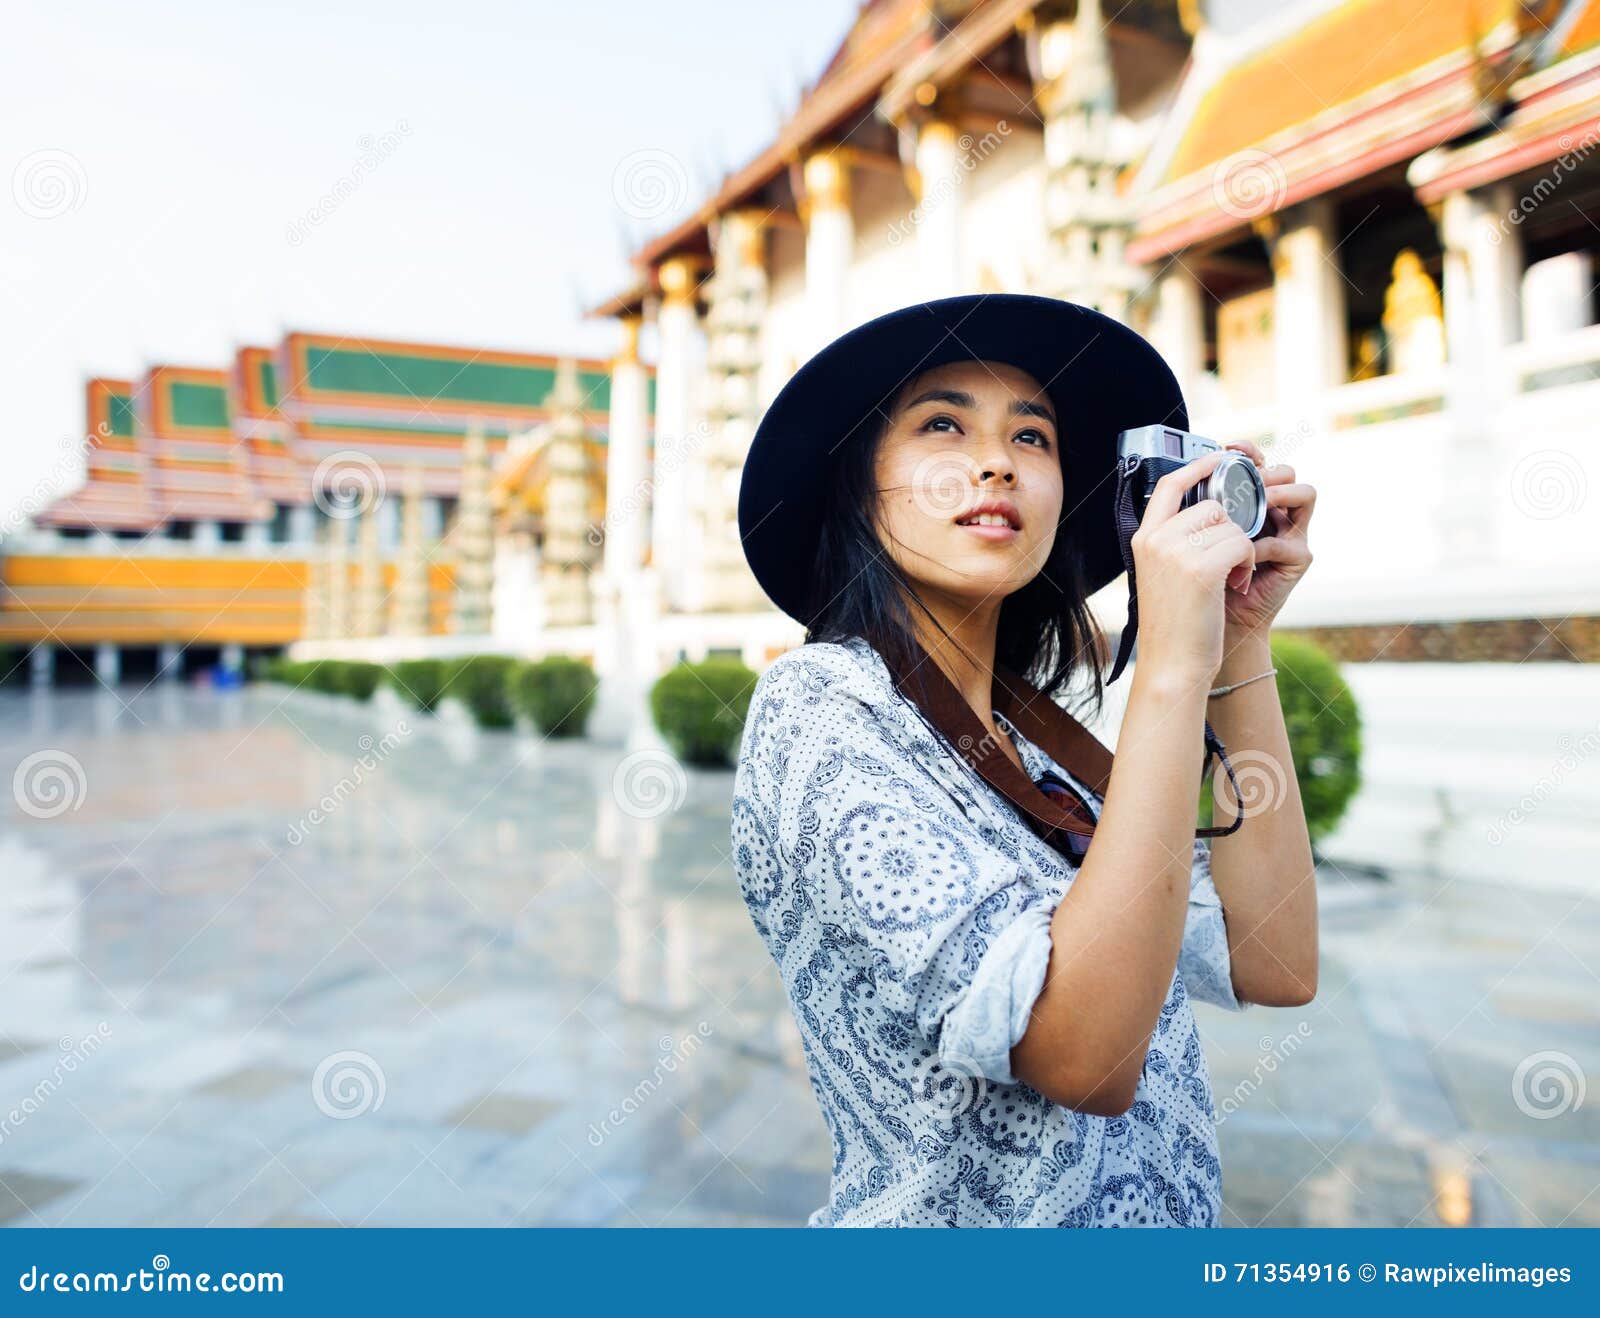 photographer travel sightseeing wander hobby recreation concept